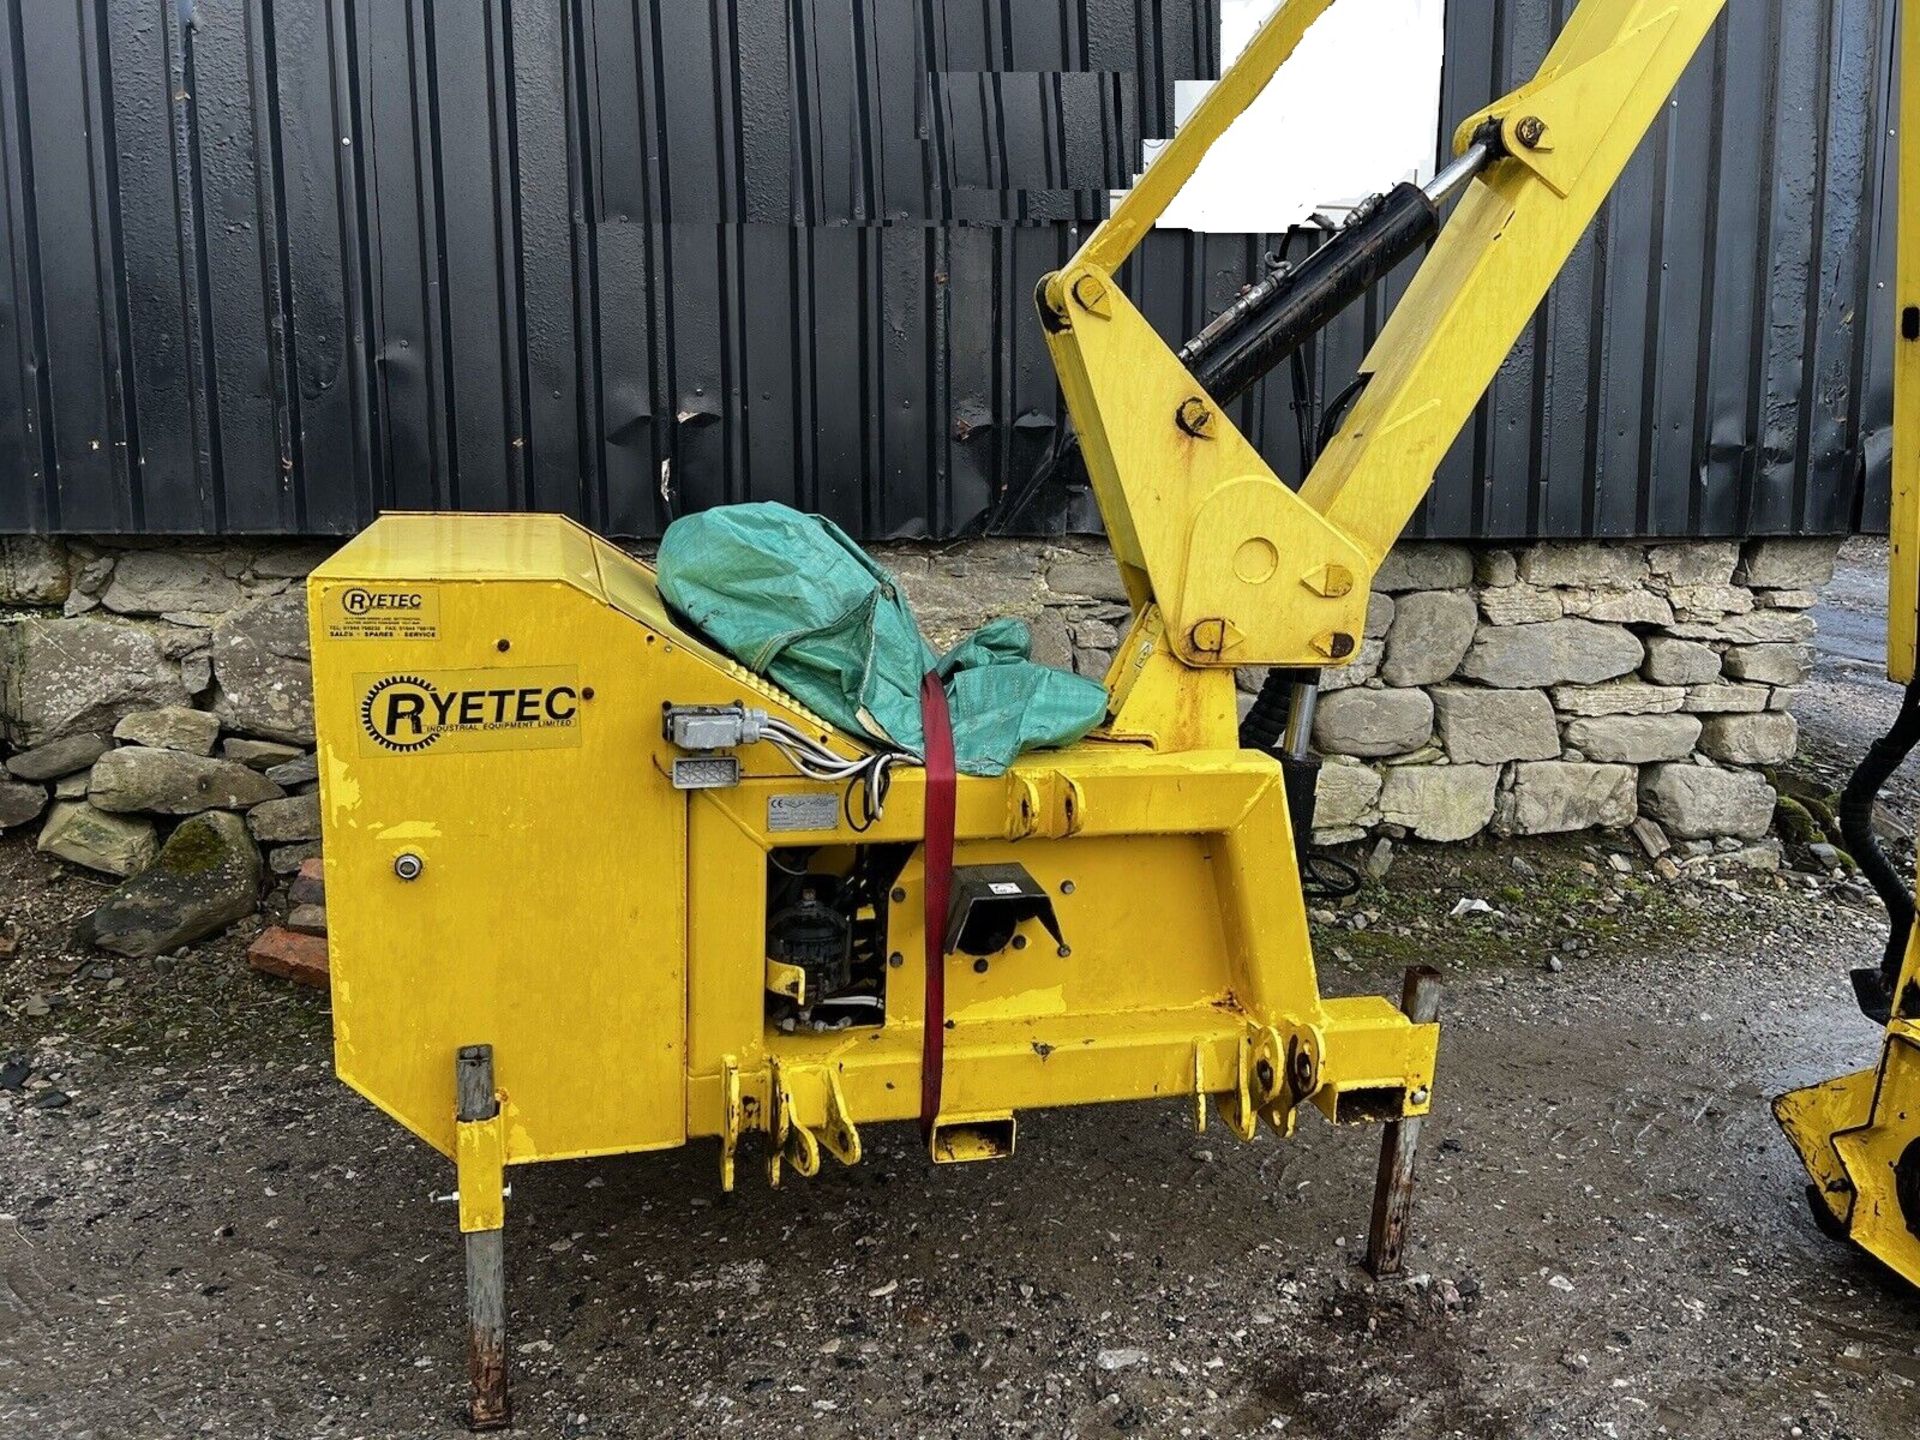 PRECISION CUTTING: RYTEC KS550 HEDGE CUTTER WITH 1.2M HEAD - Image 10 of 12